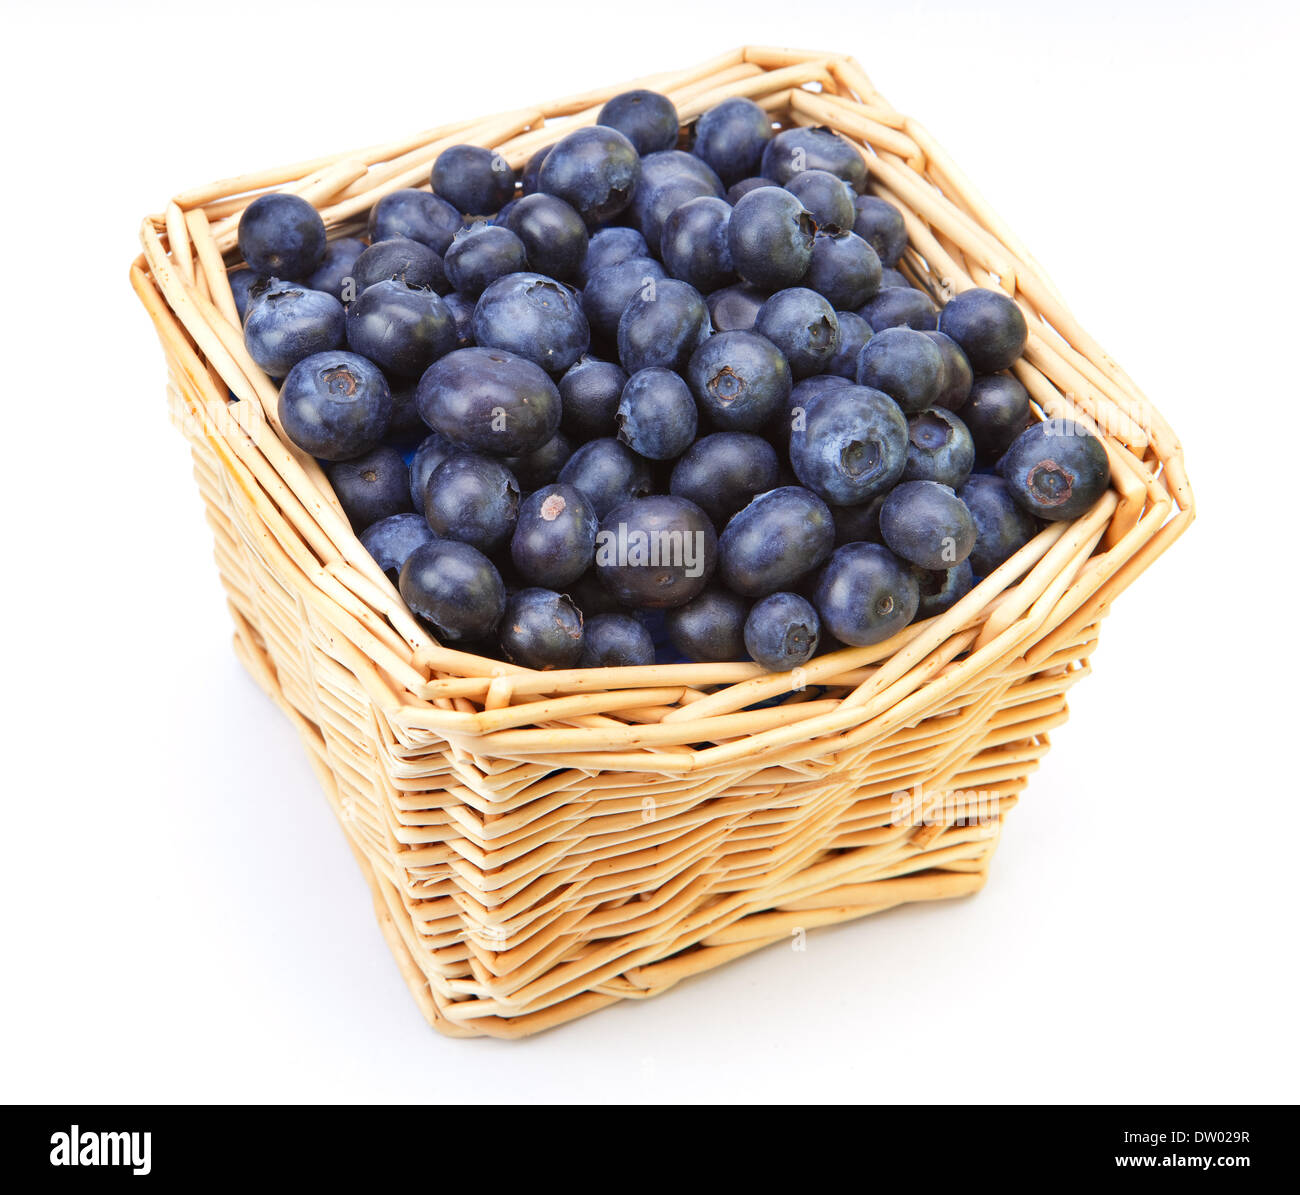 The basket full of a ripe bilberry Stock Photo